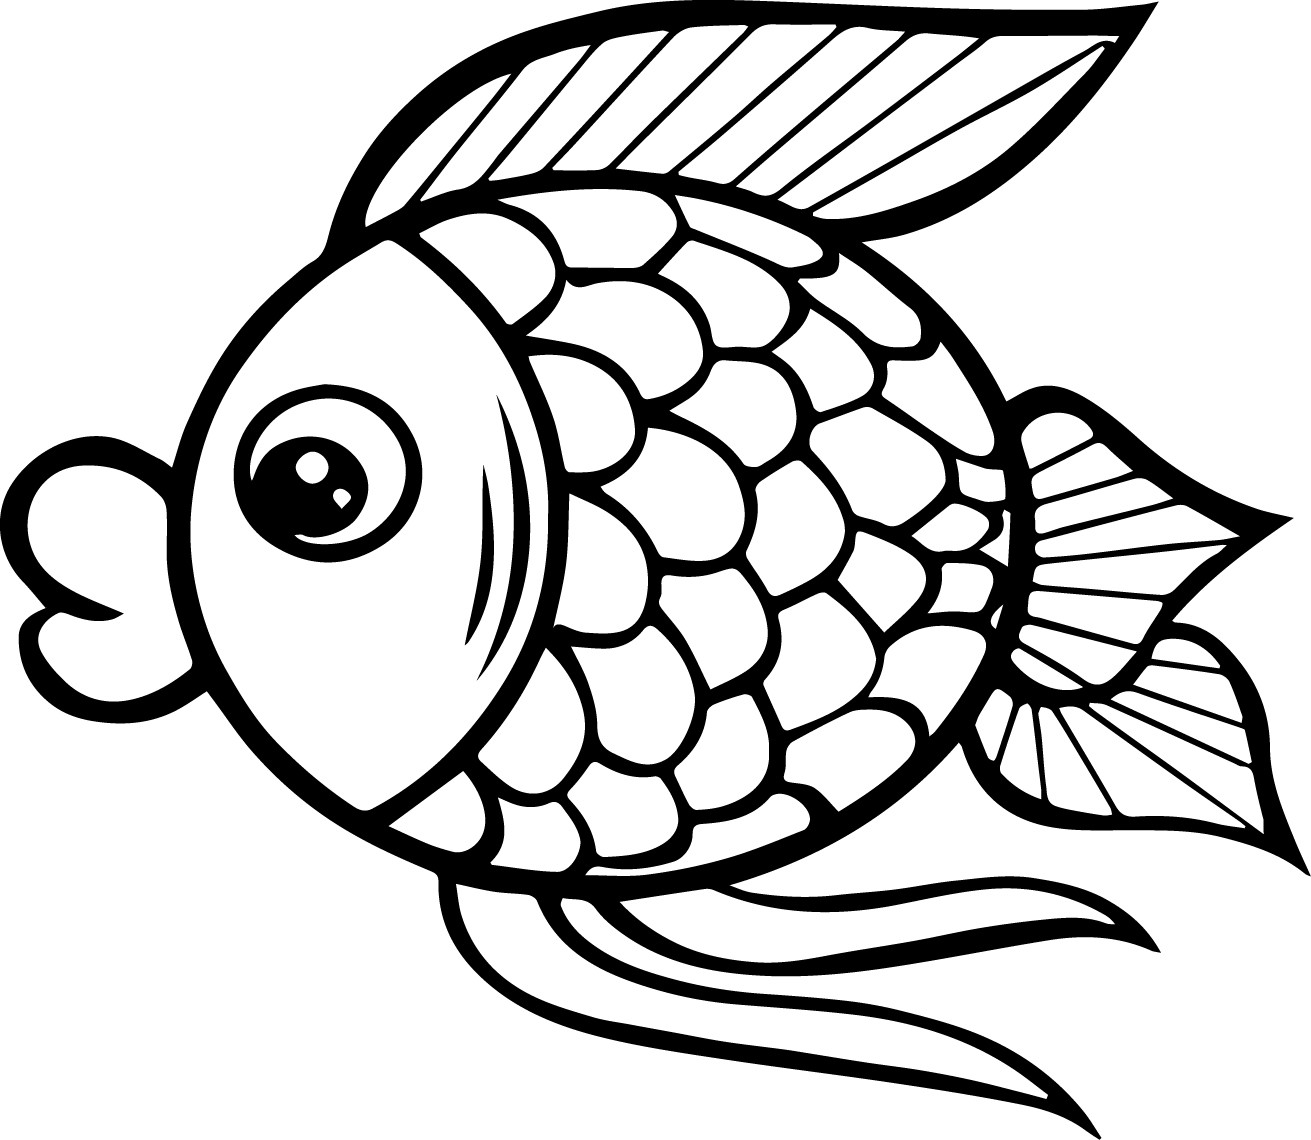 Fish Coloring Book Pages
 Sampler Fish Colouring Picture Coloring Pages For Kids